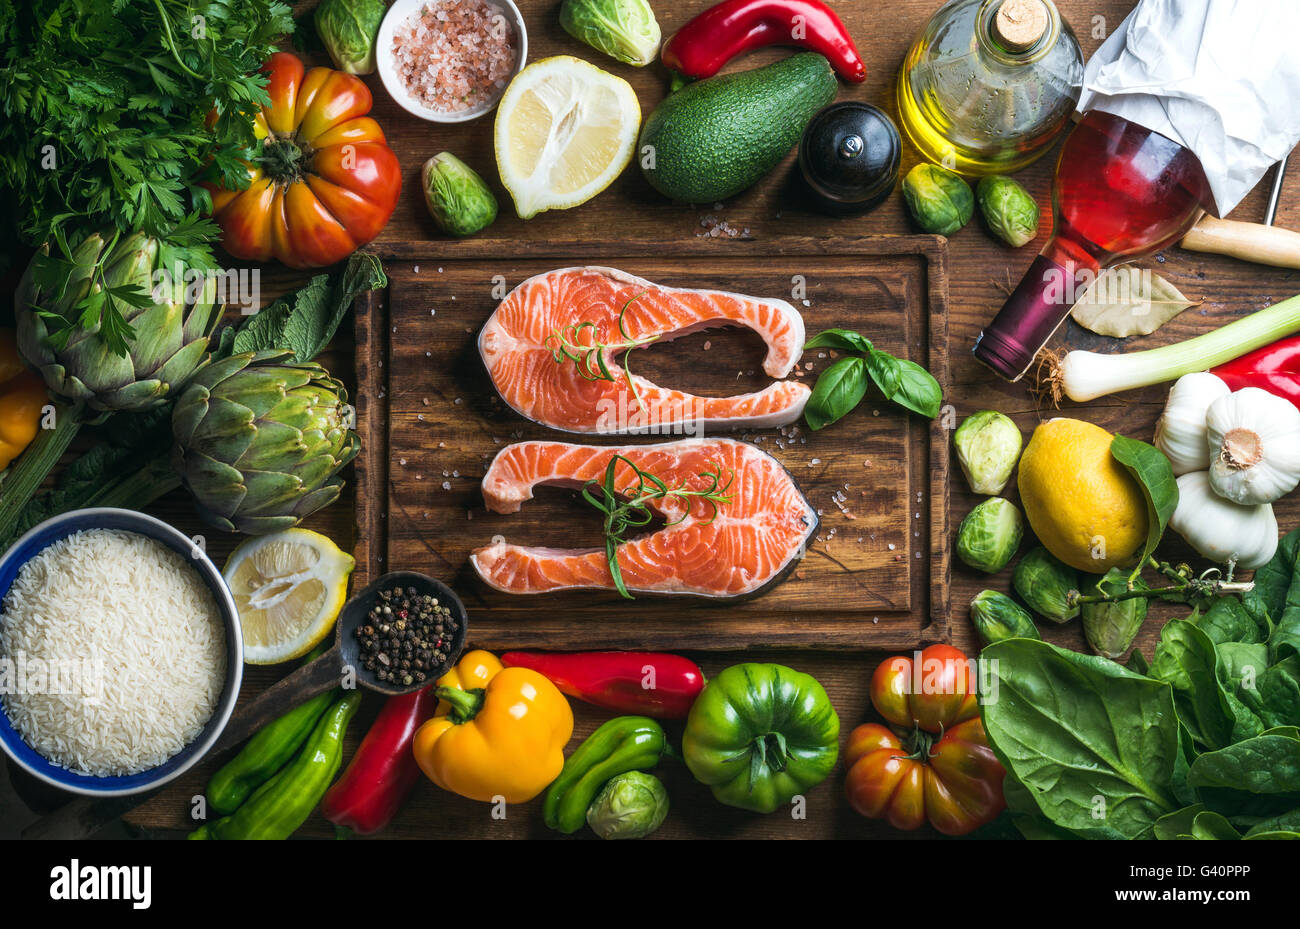 Raw uncooked salmon steak with vegetables, rice, herbs, spices and wine bottle on chopping board over rustic wooden background, Stock Photo